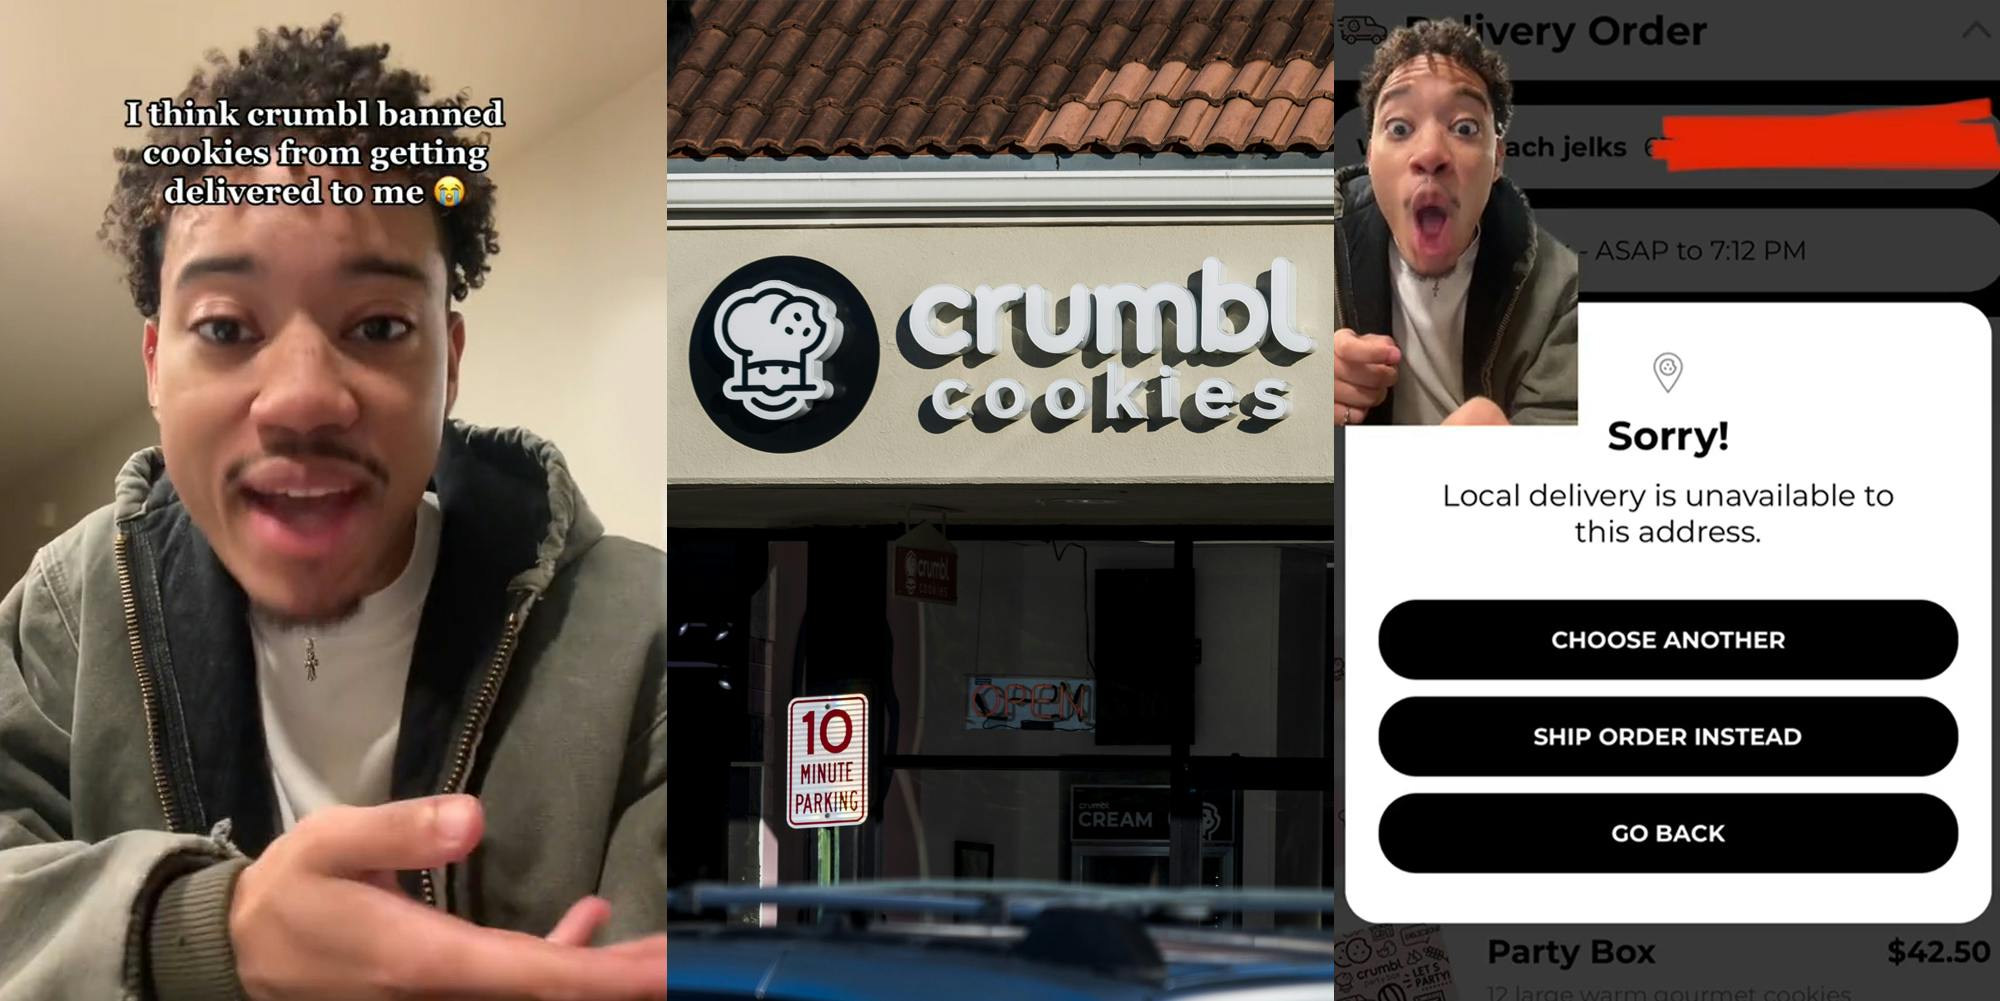 man speaking with caption 'I think crumbl banned cookies from getting delivered to me' (l) Crumbl Cookies sign on building (c) man greenscreen TikTok over Crumbl Cookies ordering 'Sorry! Local delivery is unavailable to this address.' (r)